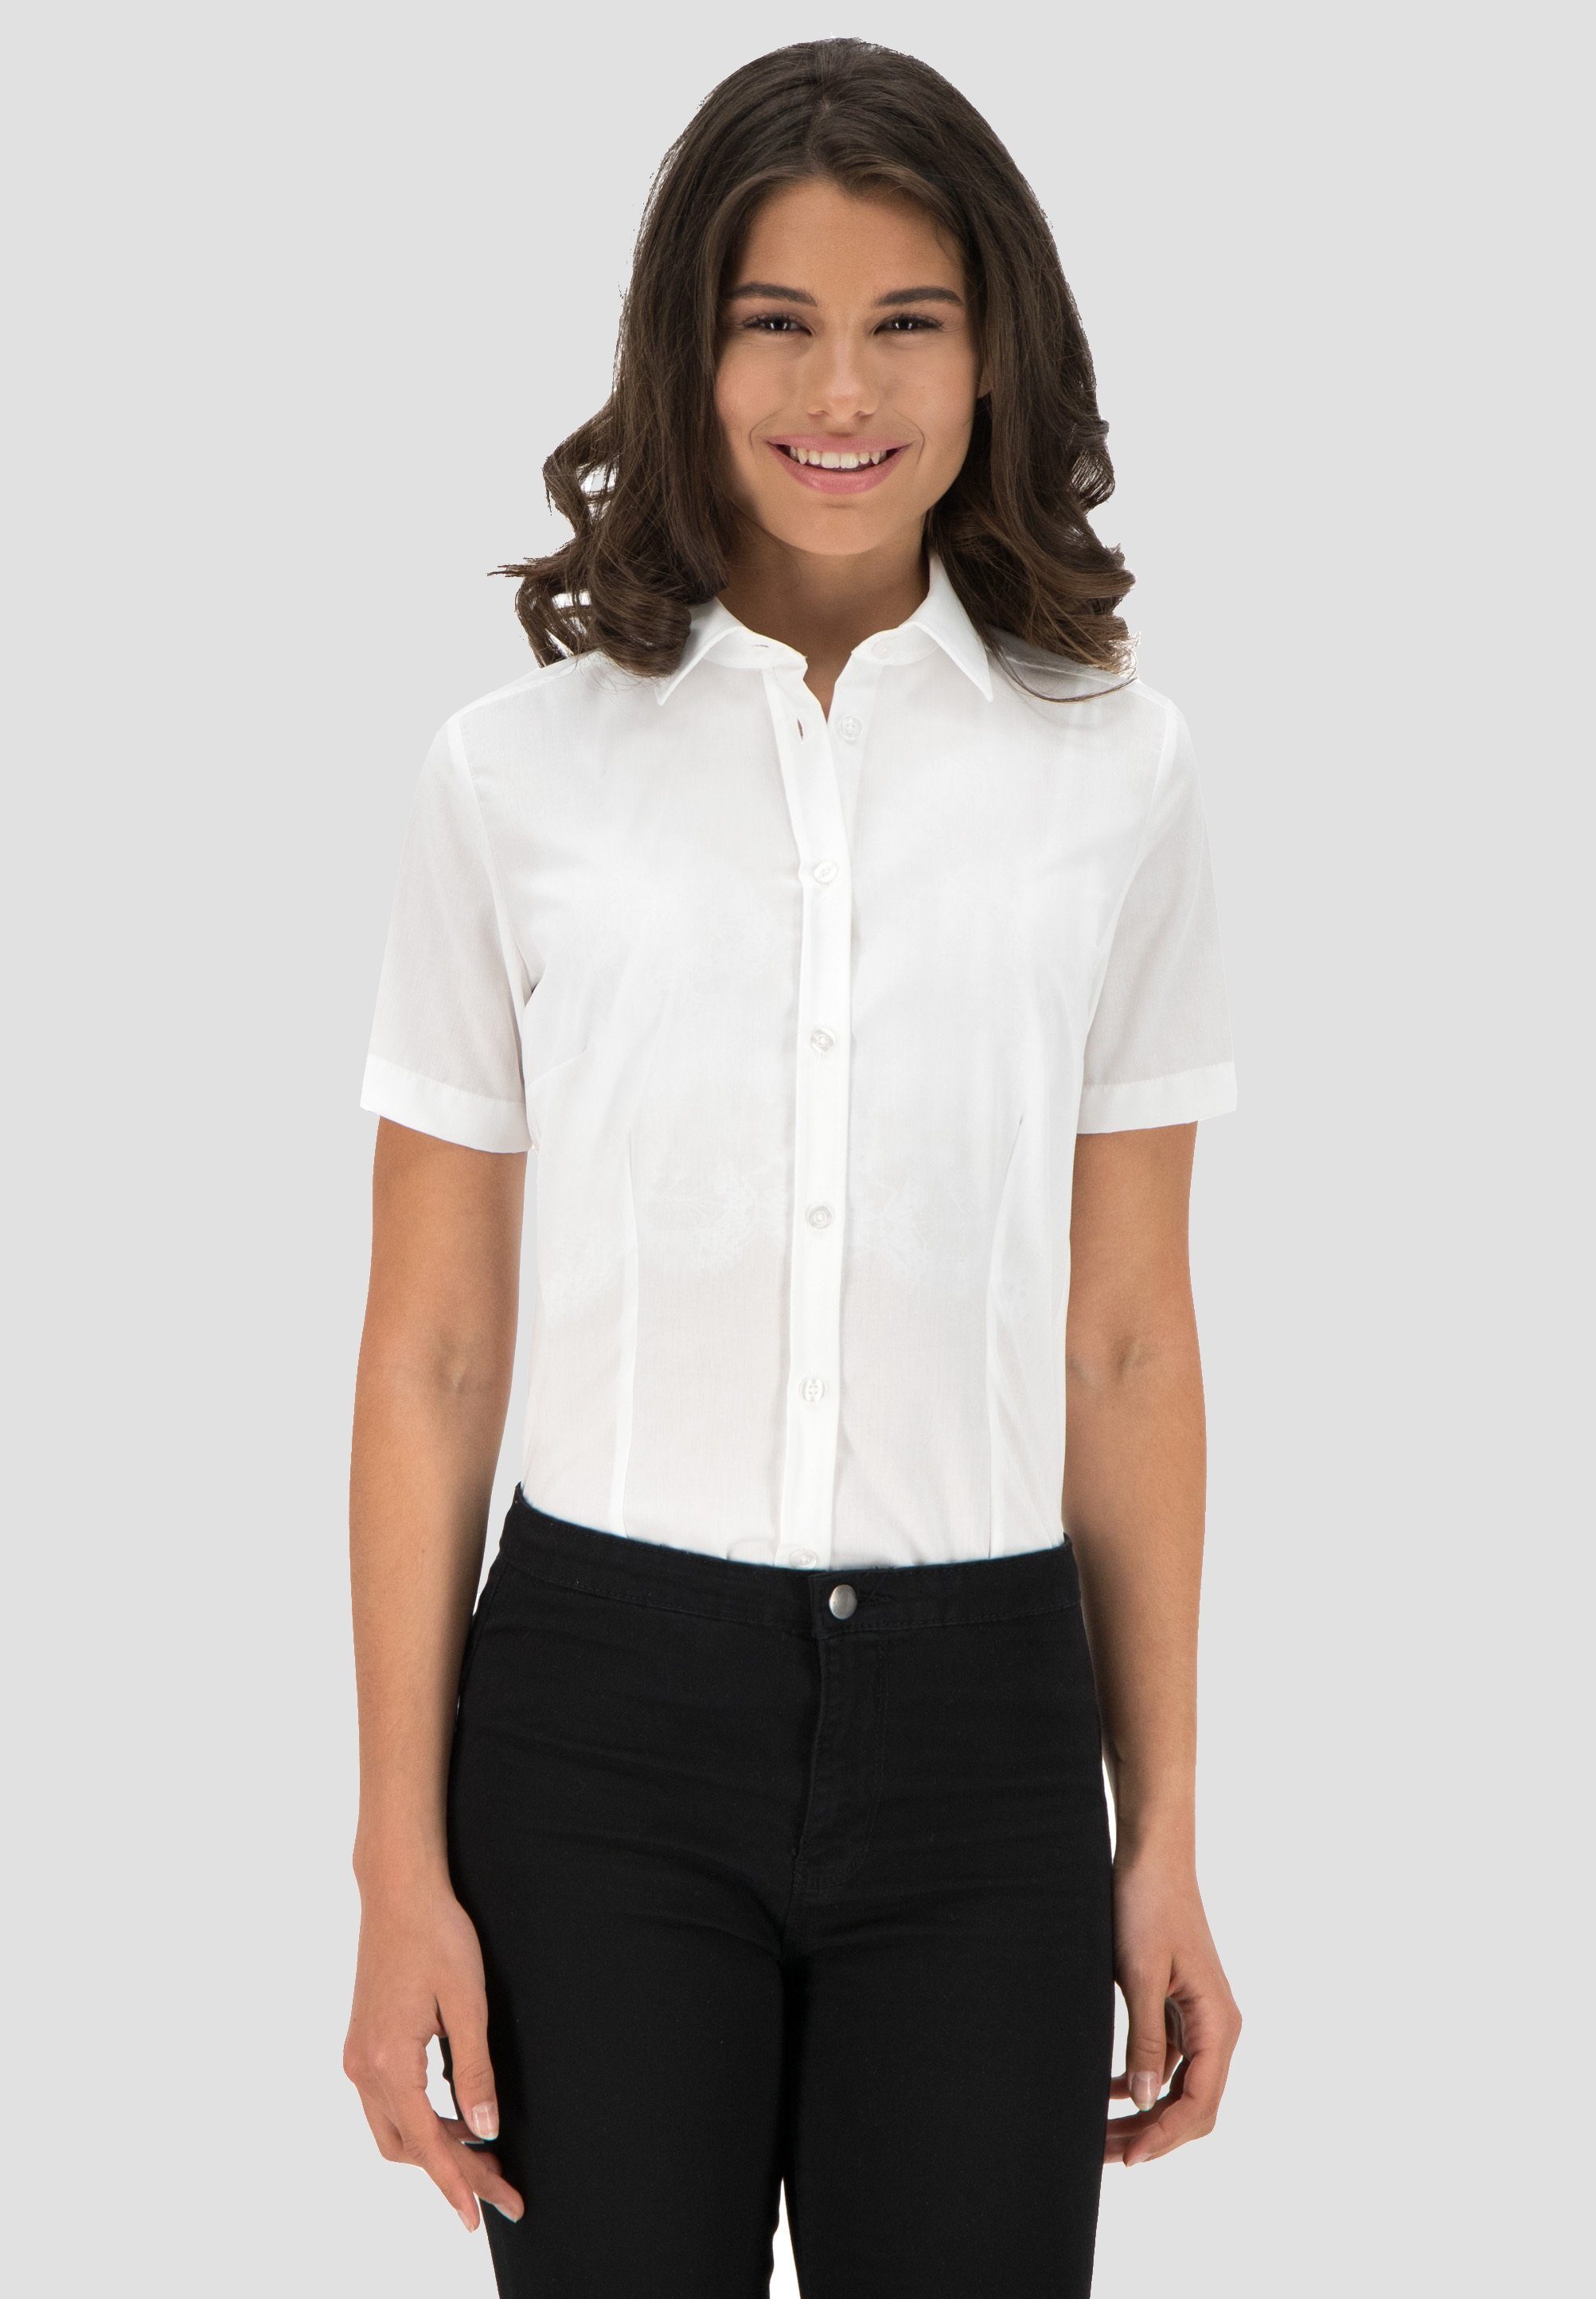 Petermann Slim in Flanellbluse moderner Sofia Fit-Passform